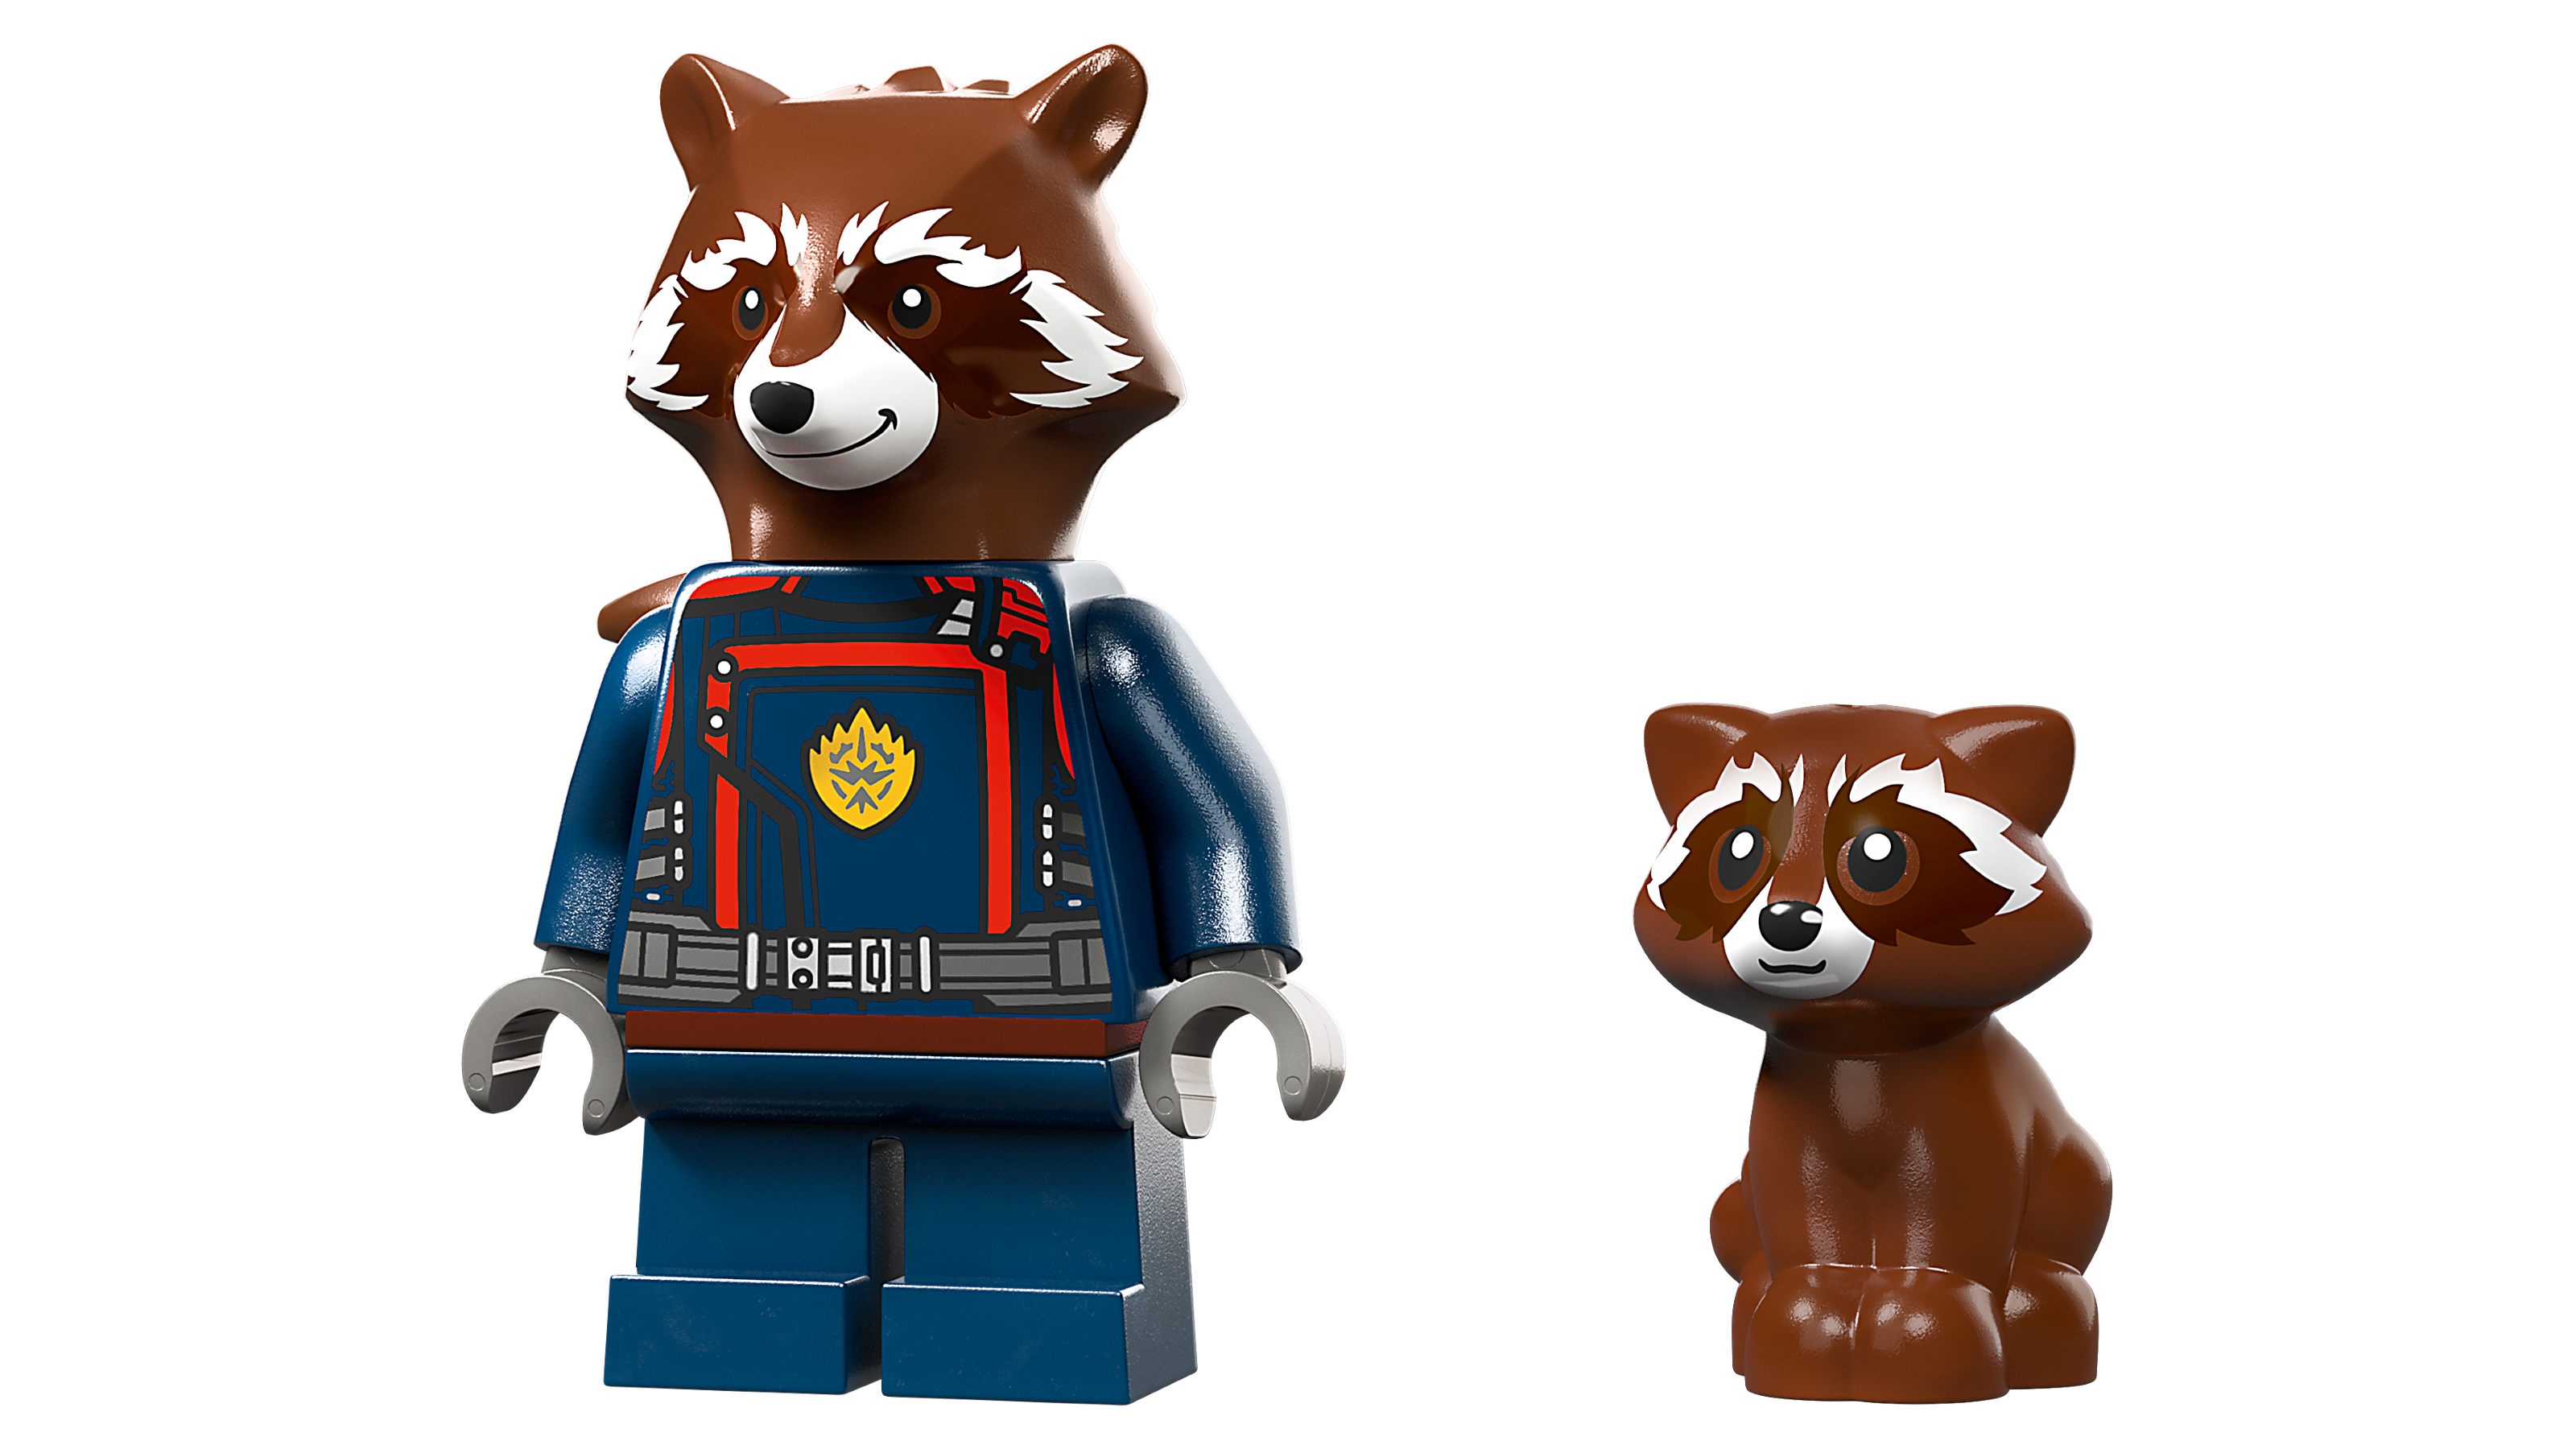 LEGO Marvel Baby Rocket's Ship 76254 Buildable Spaceship Toy from Guardians  of the Galaxy 3 Featuring Rocket Raccoon and Baby Rocket Minifigures,  Collectible Super Hero Toy Gift for Kids Ages 8 and